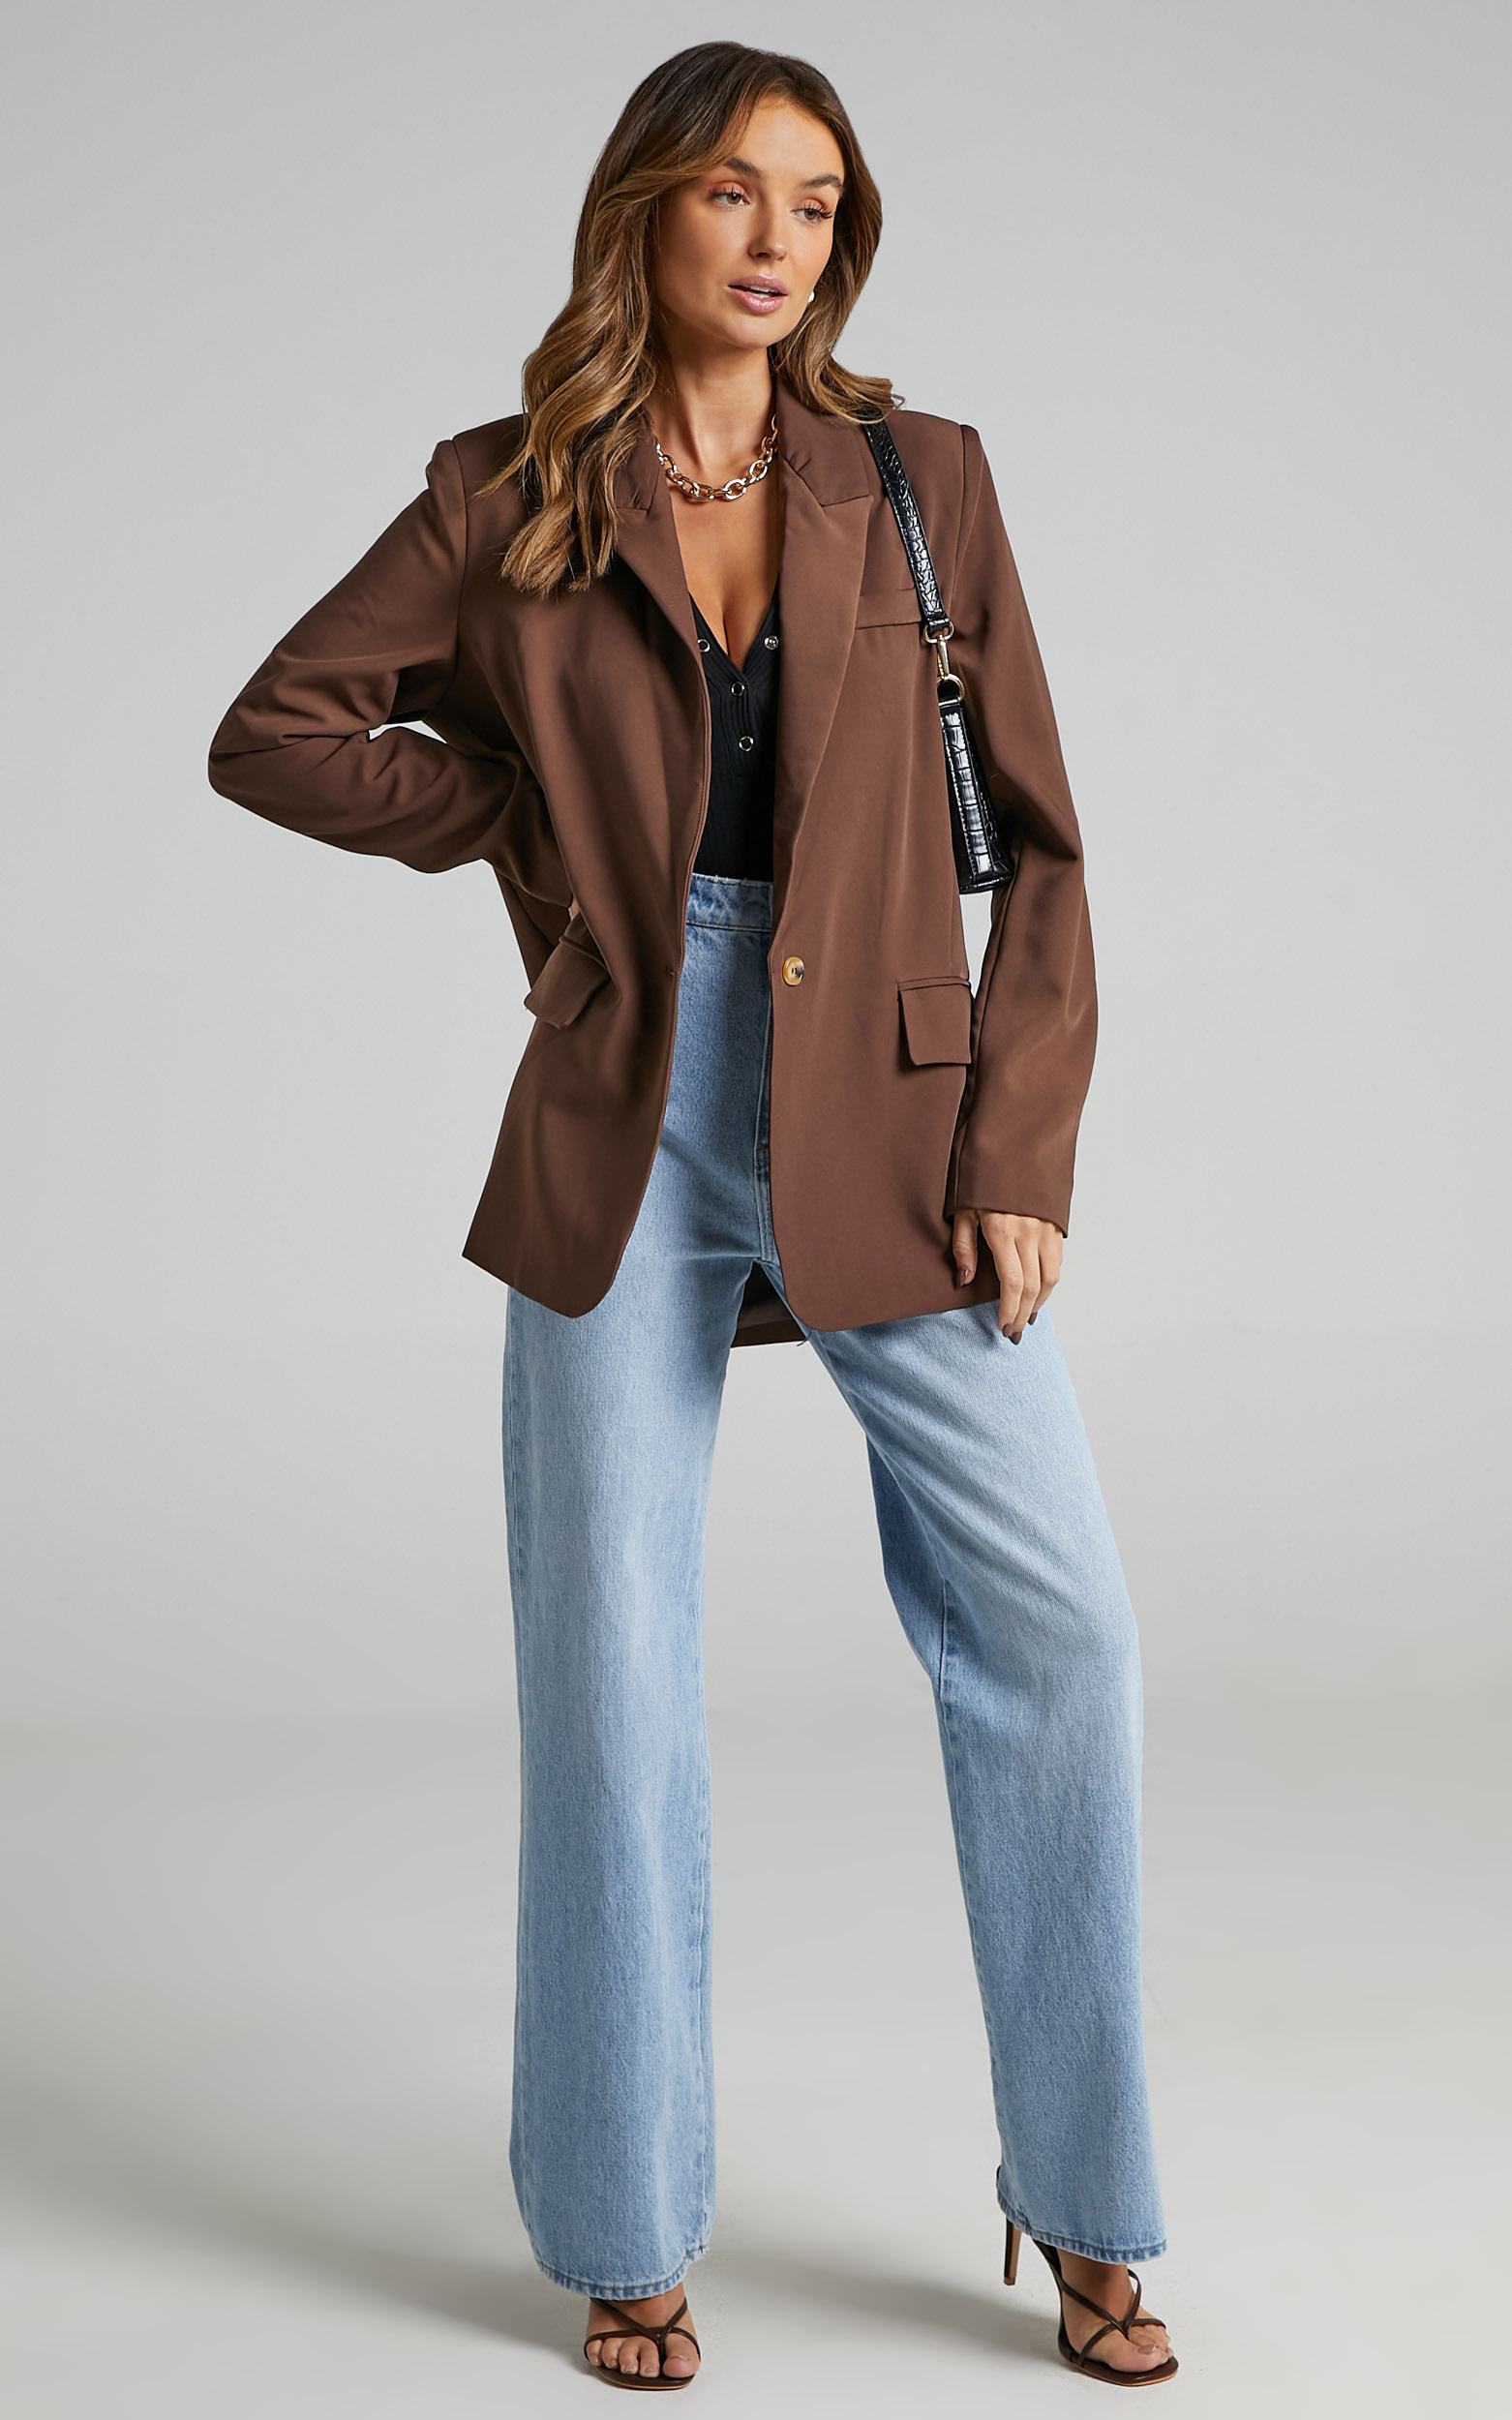 Caralina Oversized Blazer in Chocolate - 06, BRN2, hi-res image number null